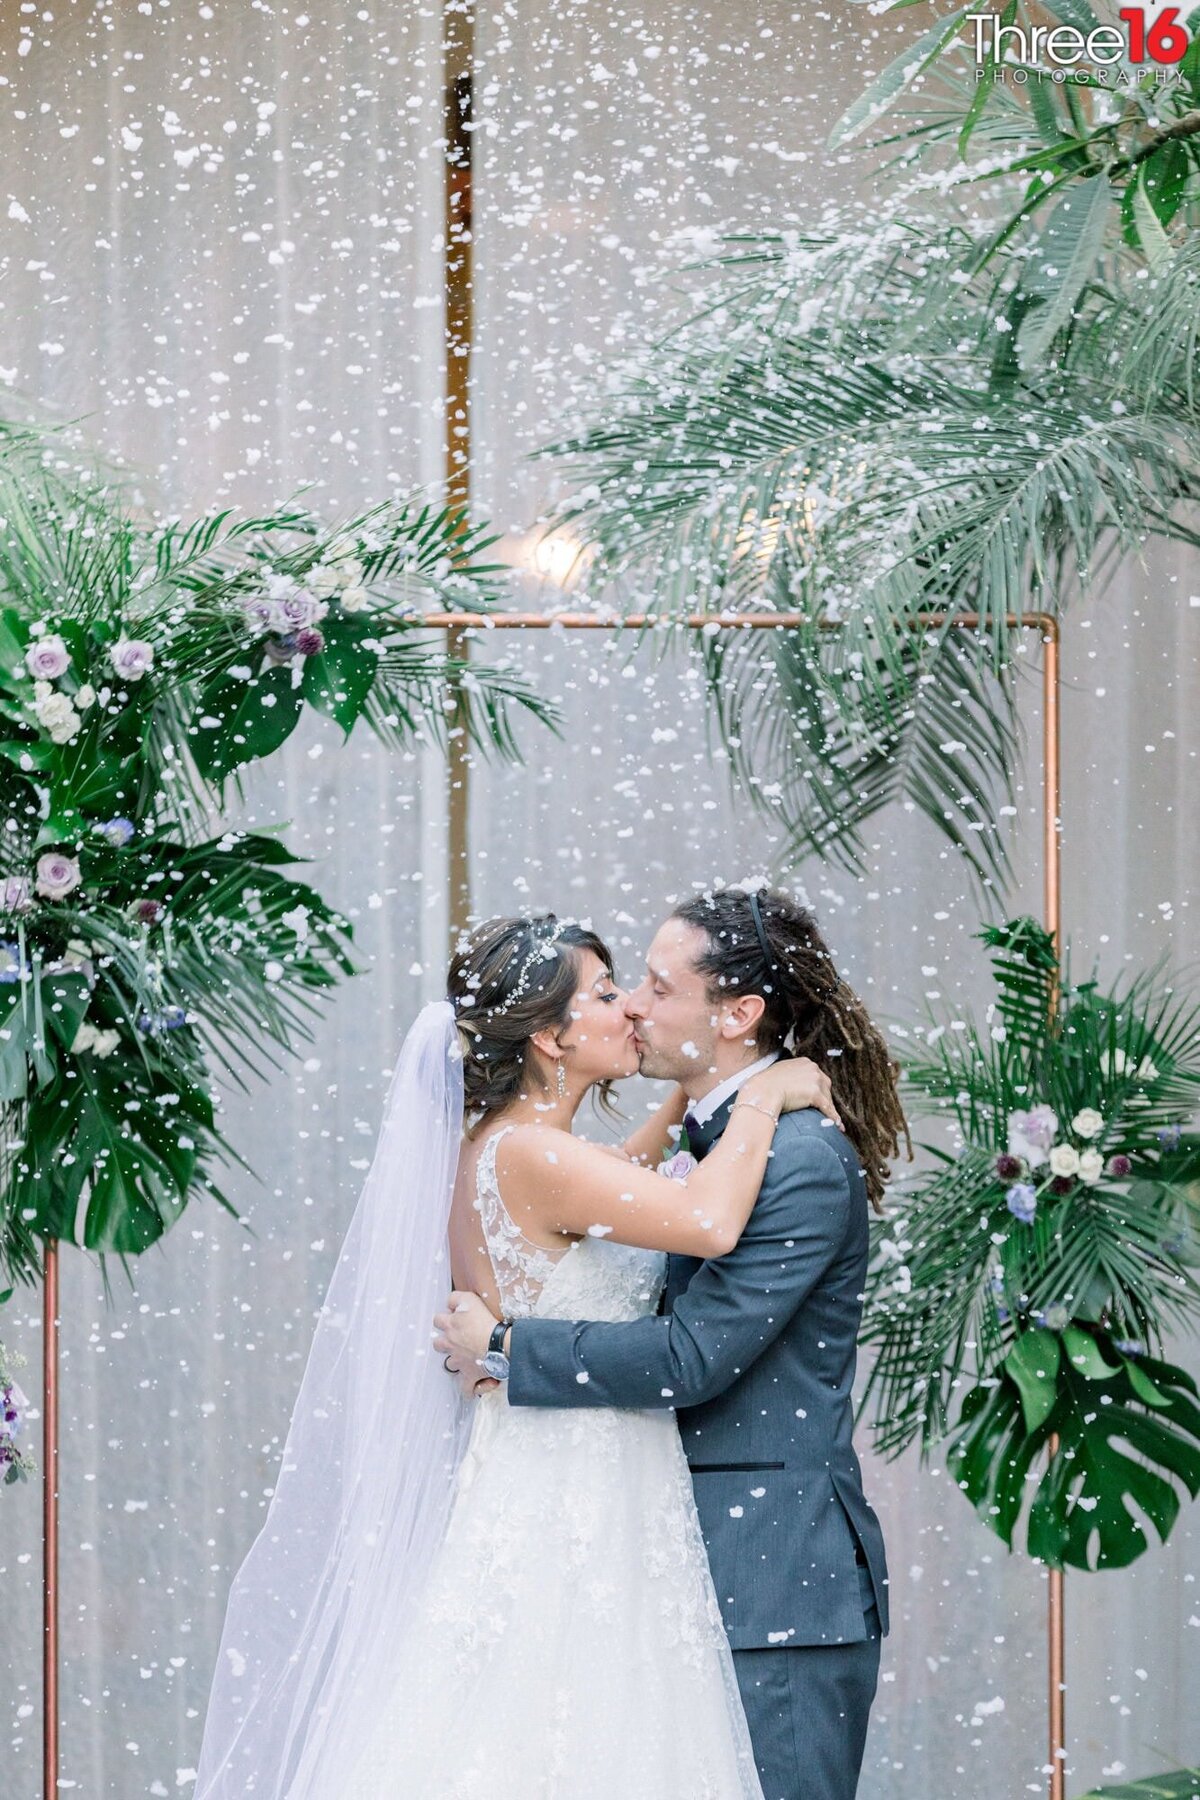 Bride and Groom share their first kiss as a married couple while confetti rains down on them